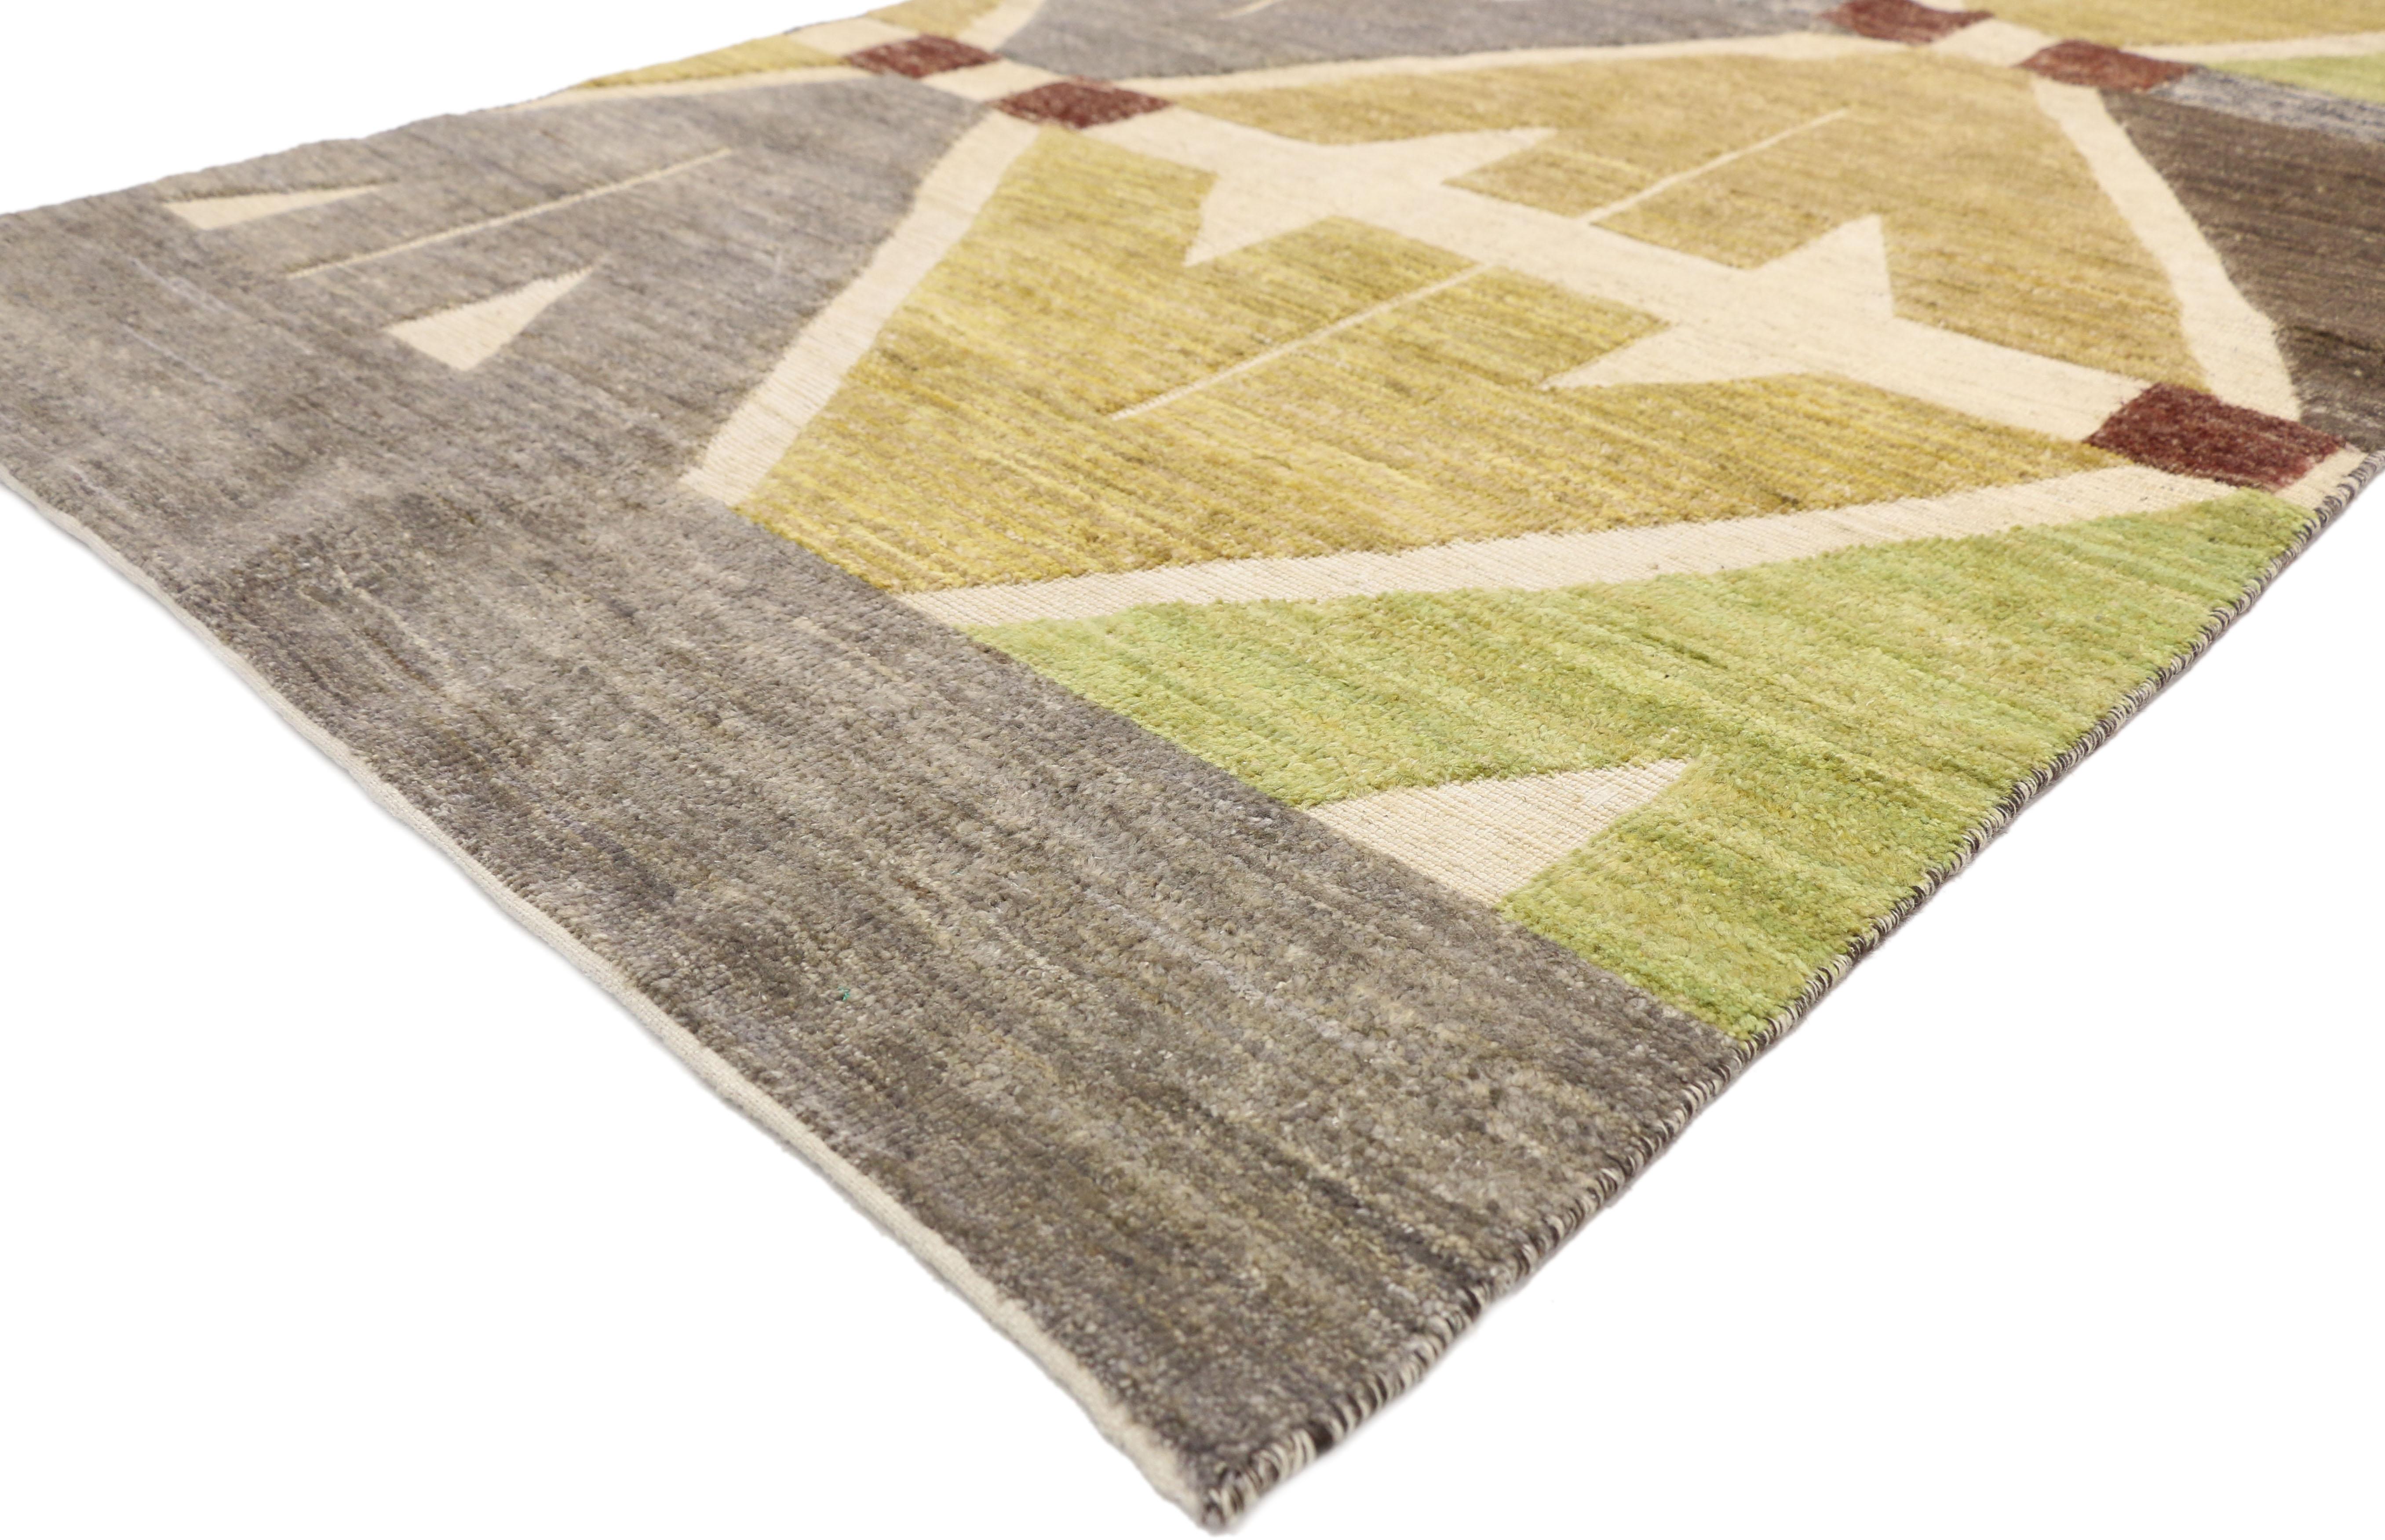 80459 Contemporary High-Low Wagireh Rug, 04'00 x 06'02. Contemporary sampler wagireh rugs from Pakistan are a modern interpretation of traditional wagireh rugs, employing the intricate weaving technique of creating small sample designs on a larger